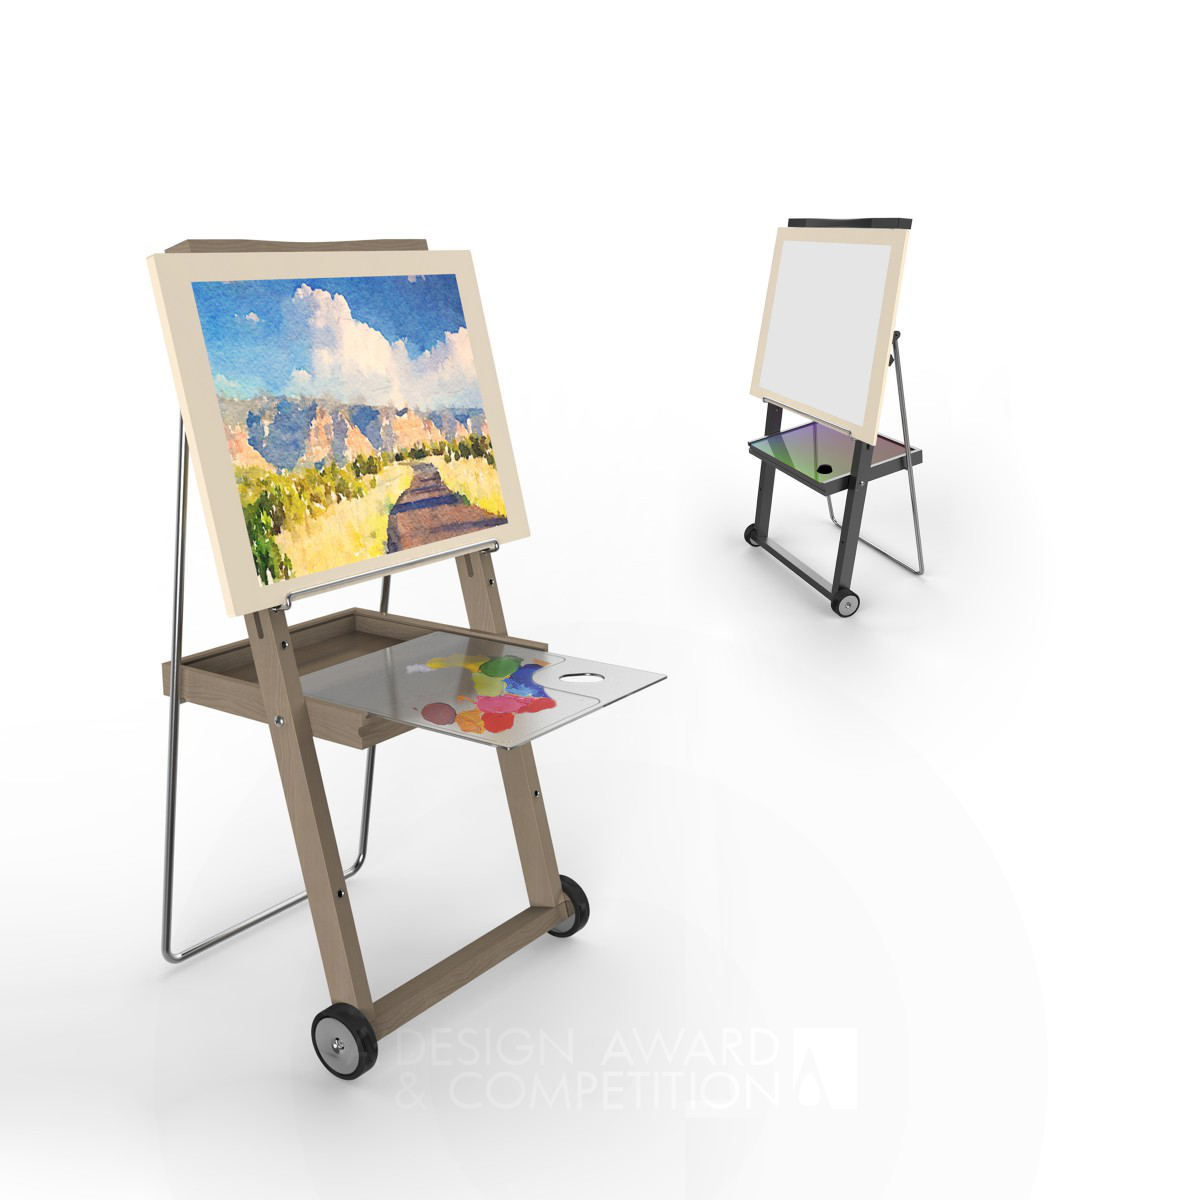 Free and Easy: Redefining Easel Design